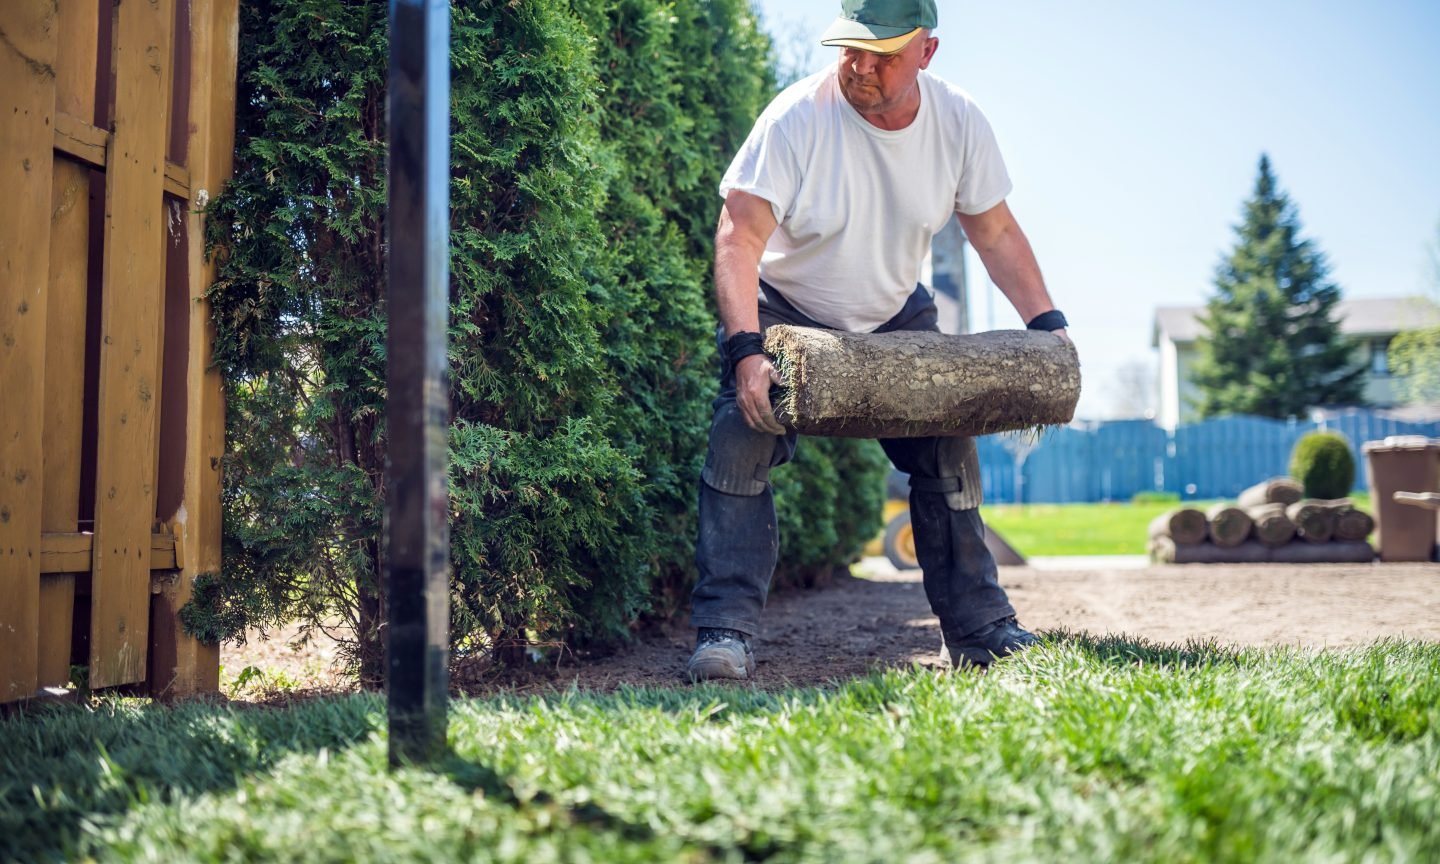 A Landscaping Or Lawn Care Business, Landscape Workers Needed